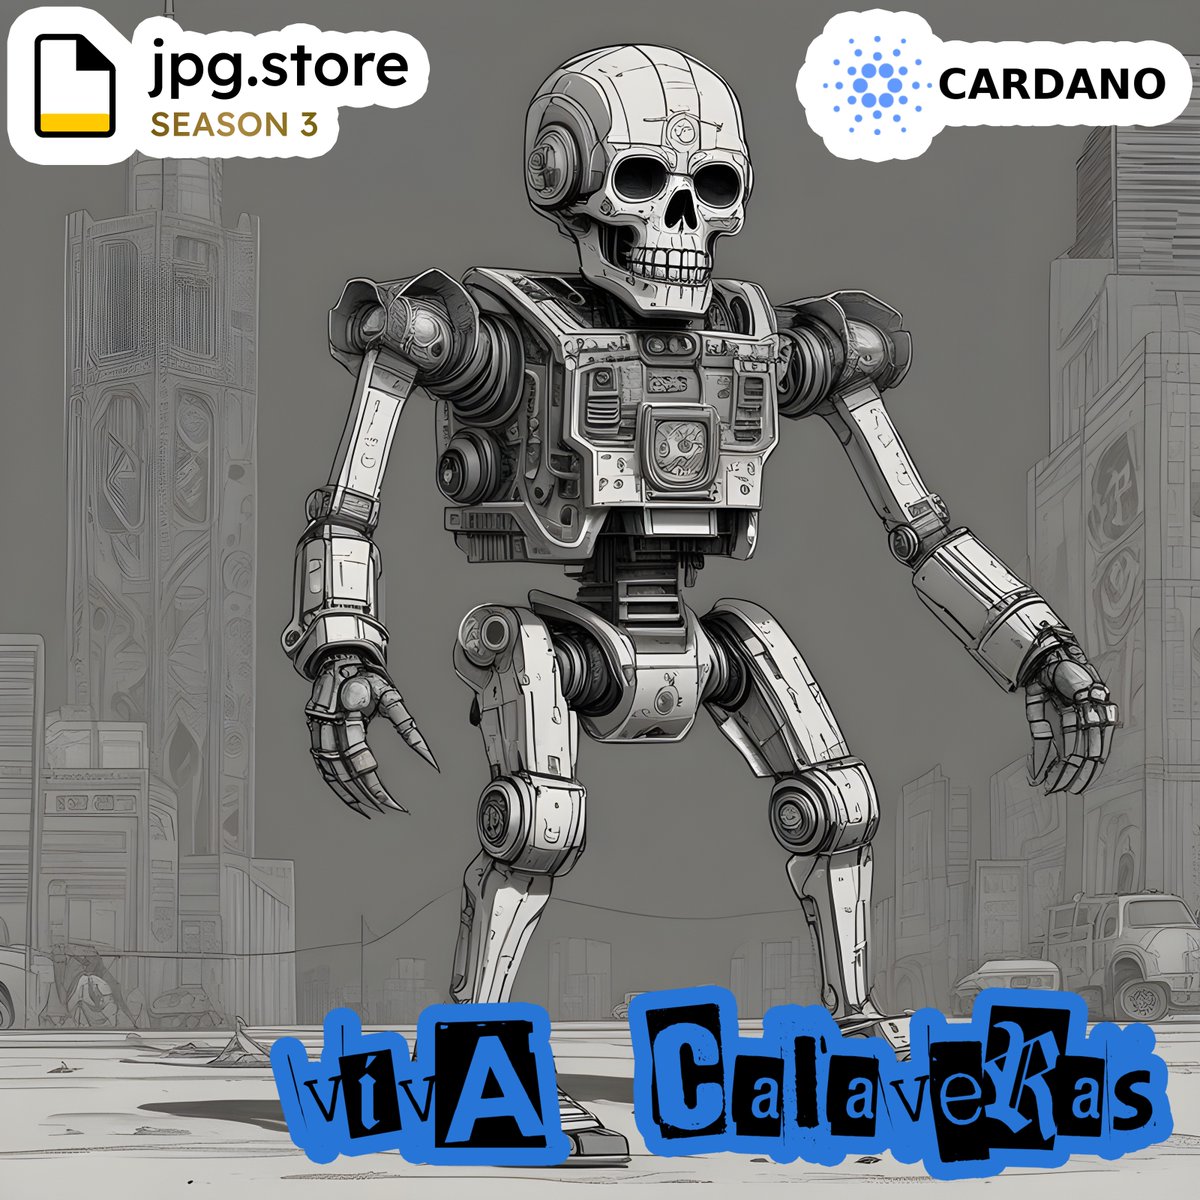 Viva Calaveras on Cardano via jpg.store ! These NFTs can be redeemed for a signed 3D printed K-SCOPES® Trading Card.

Egotron
jpg.store/listing/226769…

#cardano #ADA #CardanoNFT #CardanoCommunity #NFT #vivacalaveras #calaveras #kscopes #tradingcards #3dprinting #AI